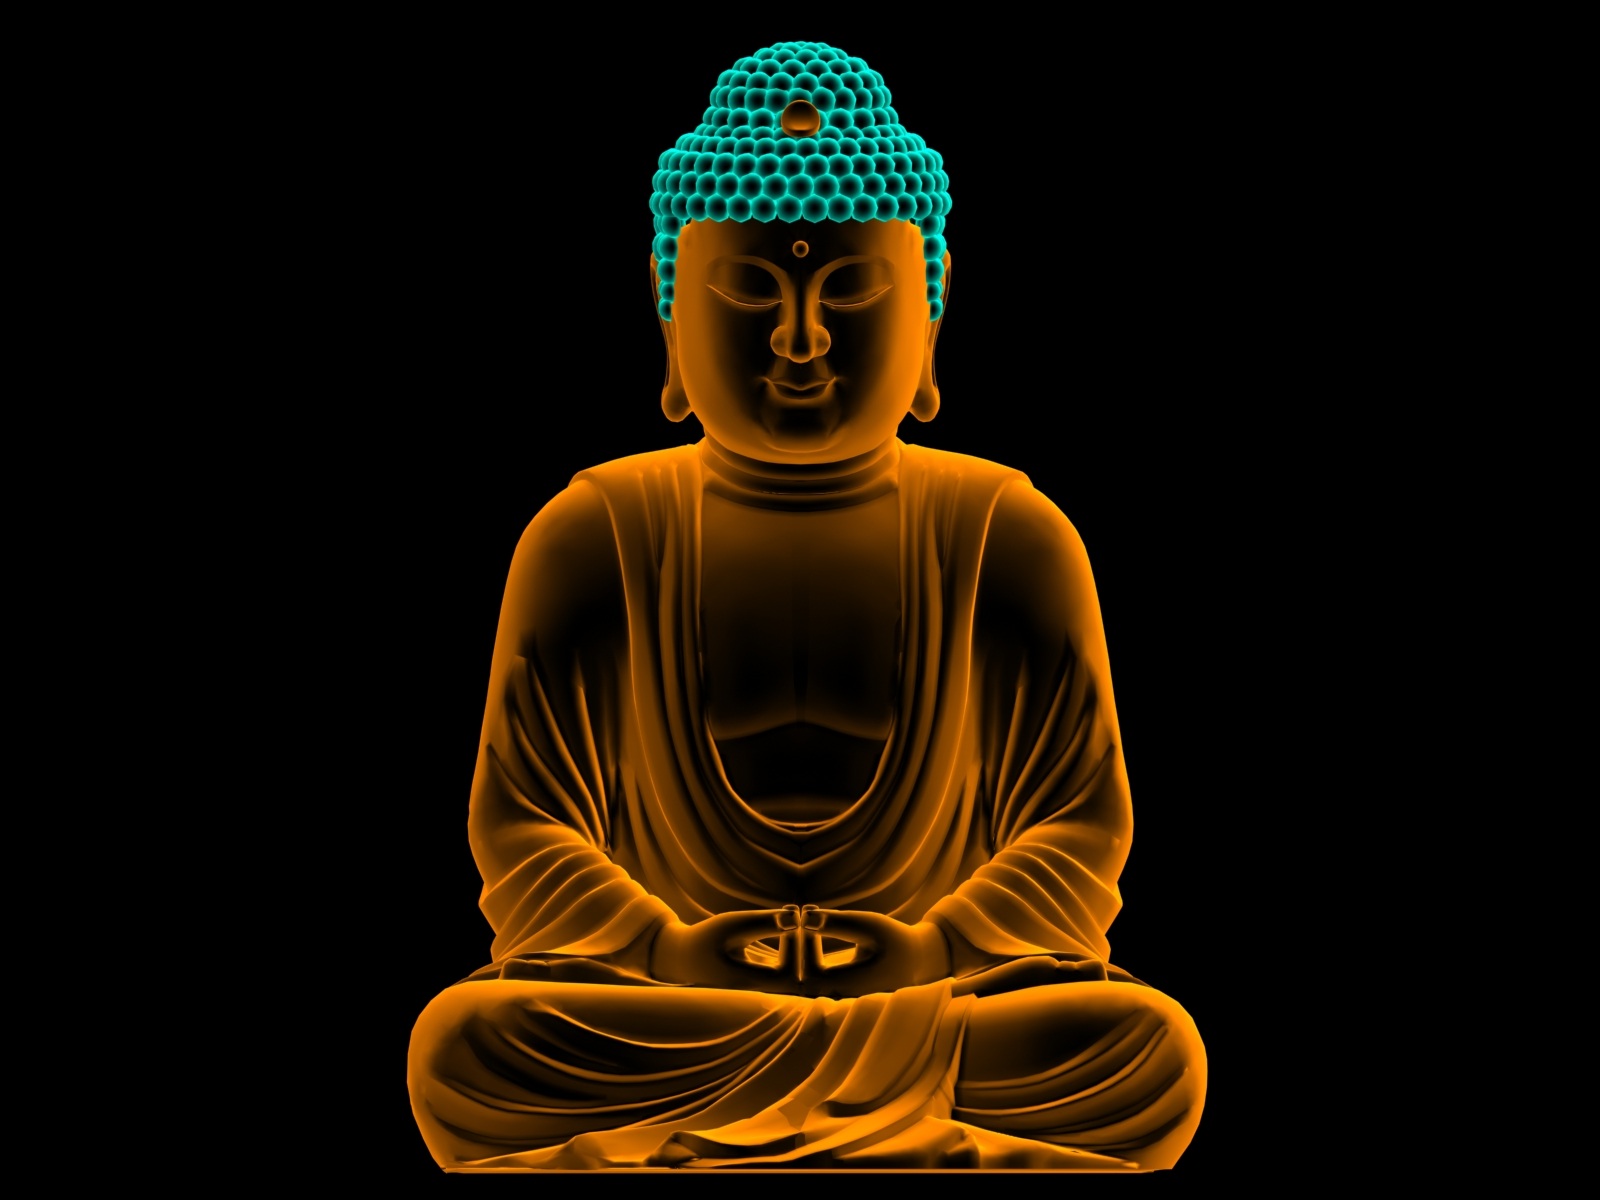 lord buddha hd wallpapers images for lord buddha hd wallpapers lord